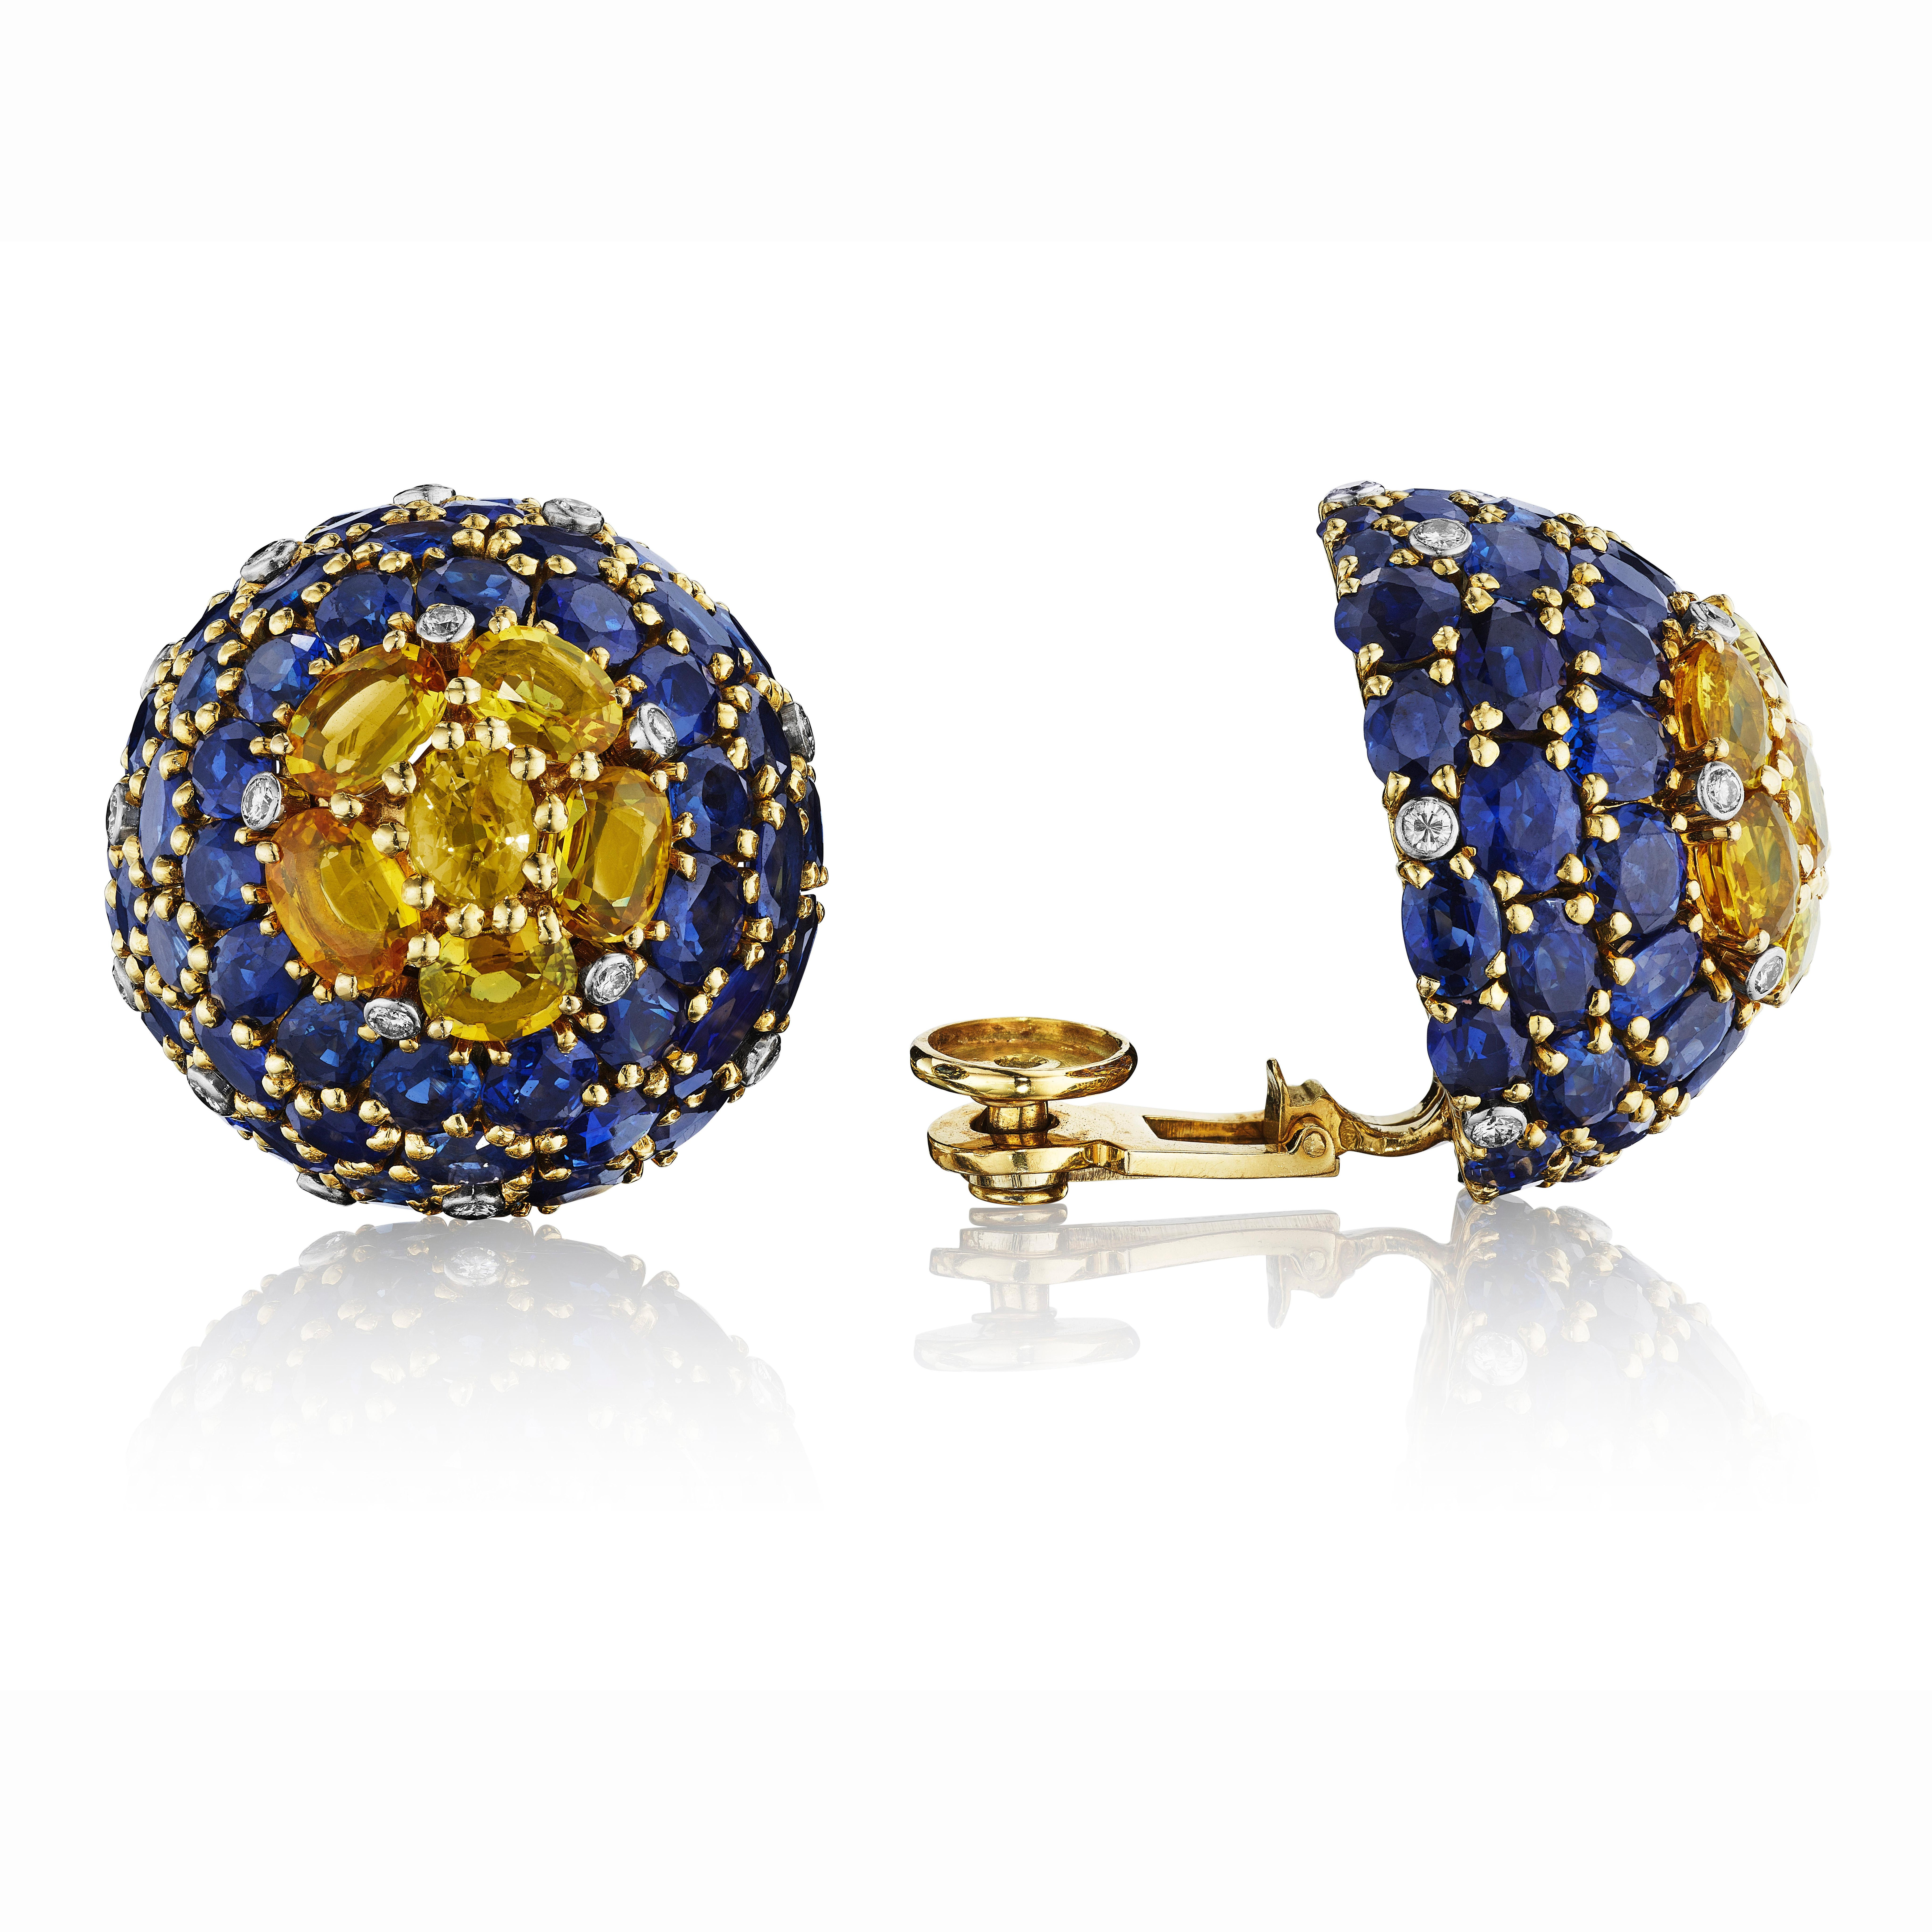 A pavé-set, oval- and circular-cut sapphire dome ring punctuated with contrasting yellow sapphires on the sides and top, accented with circular-cut diamonds; ear clips, en suite; mounted in 18-karat yellow gold and platinum, with French assay marks